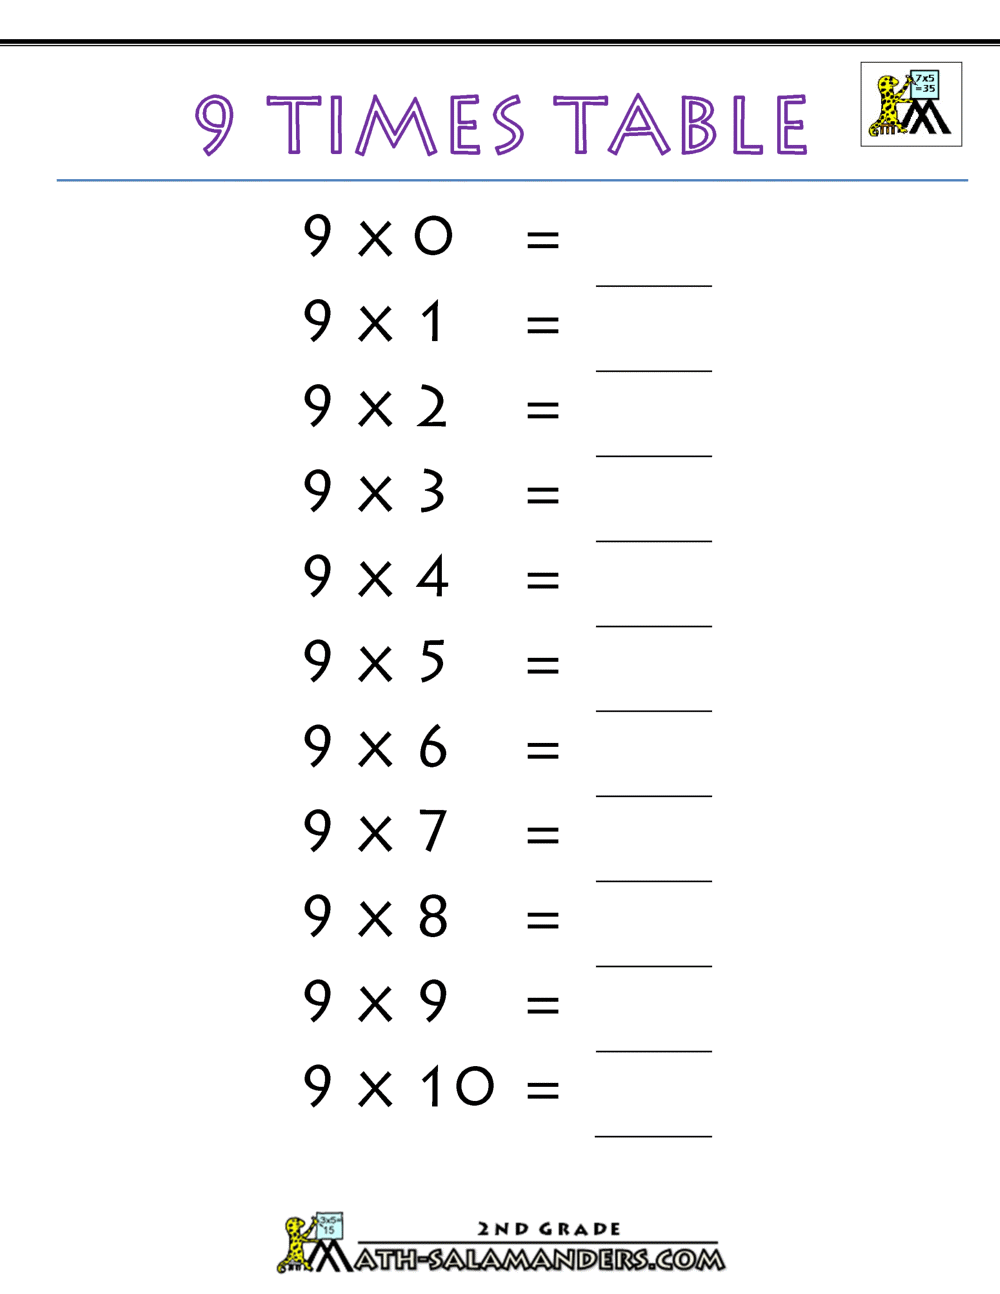 9 Times Tables Worksheets